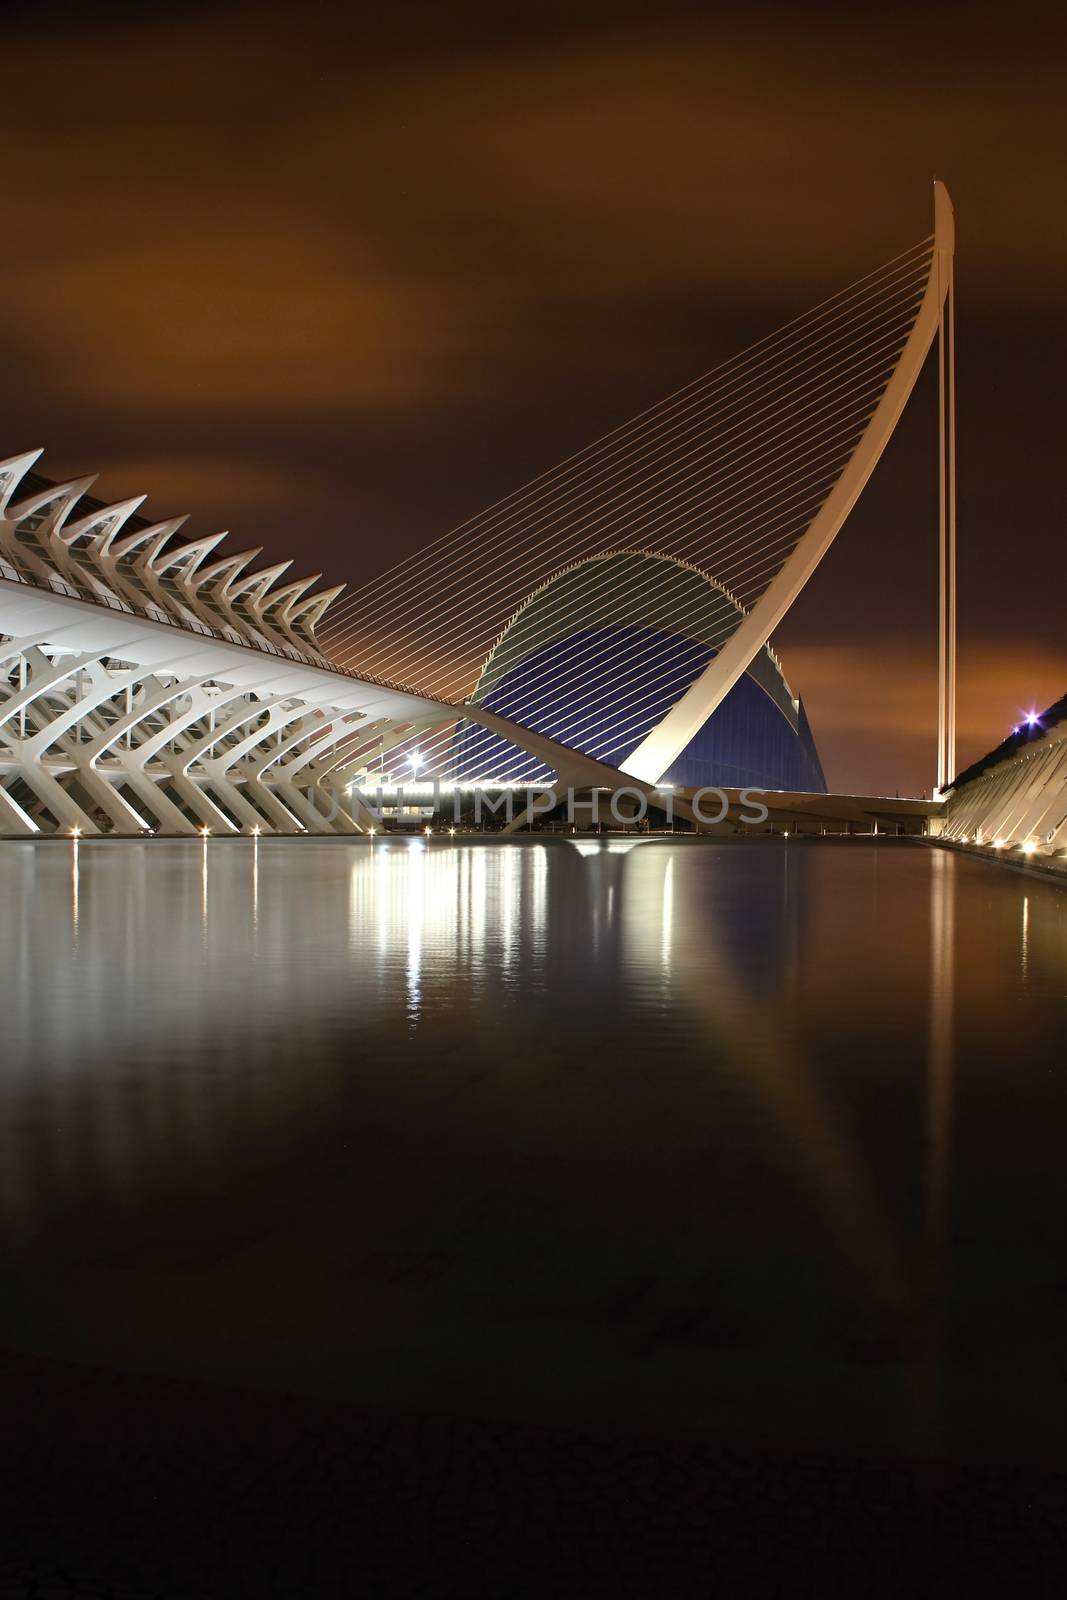 Photo shows Valencia city at night and its various surroundings.